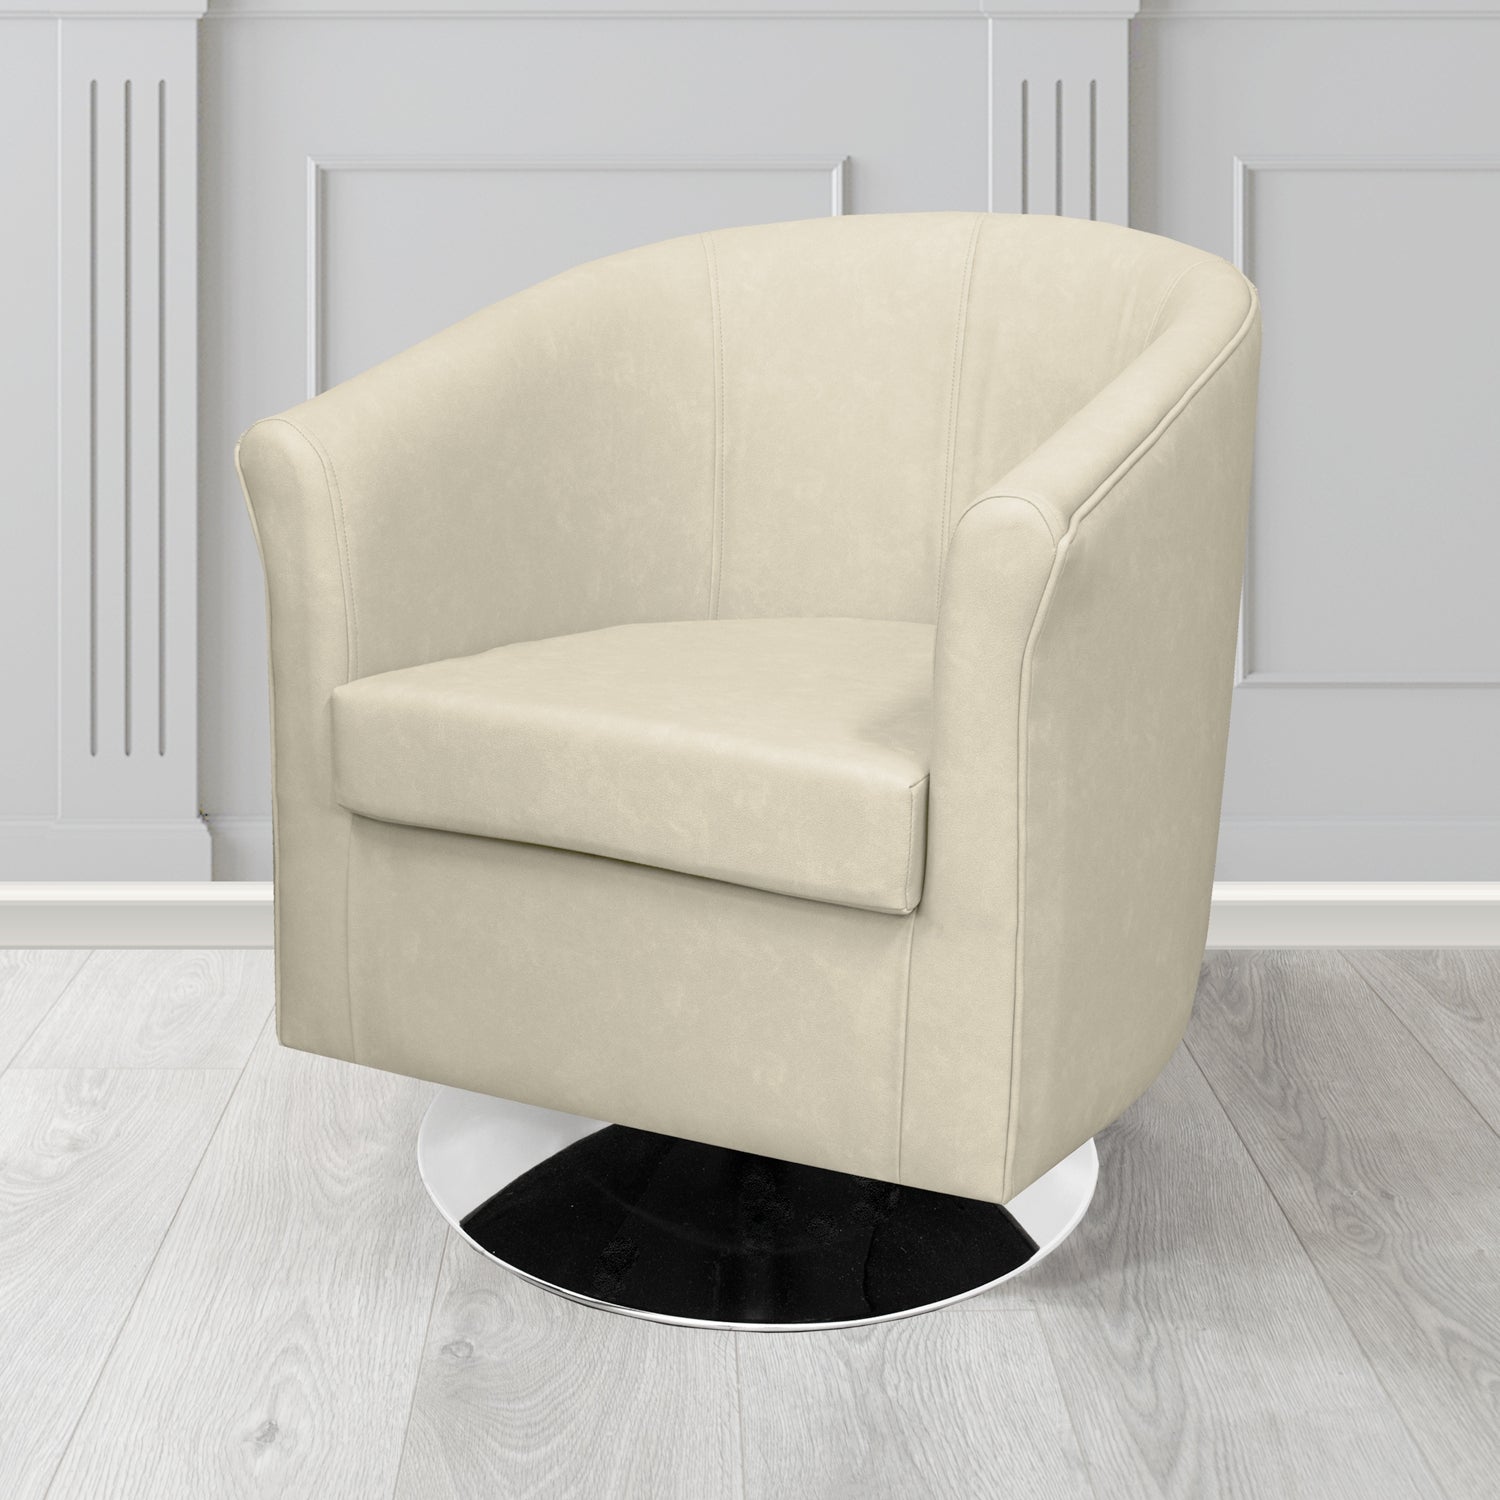 Tuscany Swivel Tub Chair in Infiniti Stone INF1844 Antimicrobial Crib 5 Faux Leather - The Tub Chair Shop